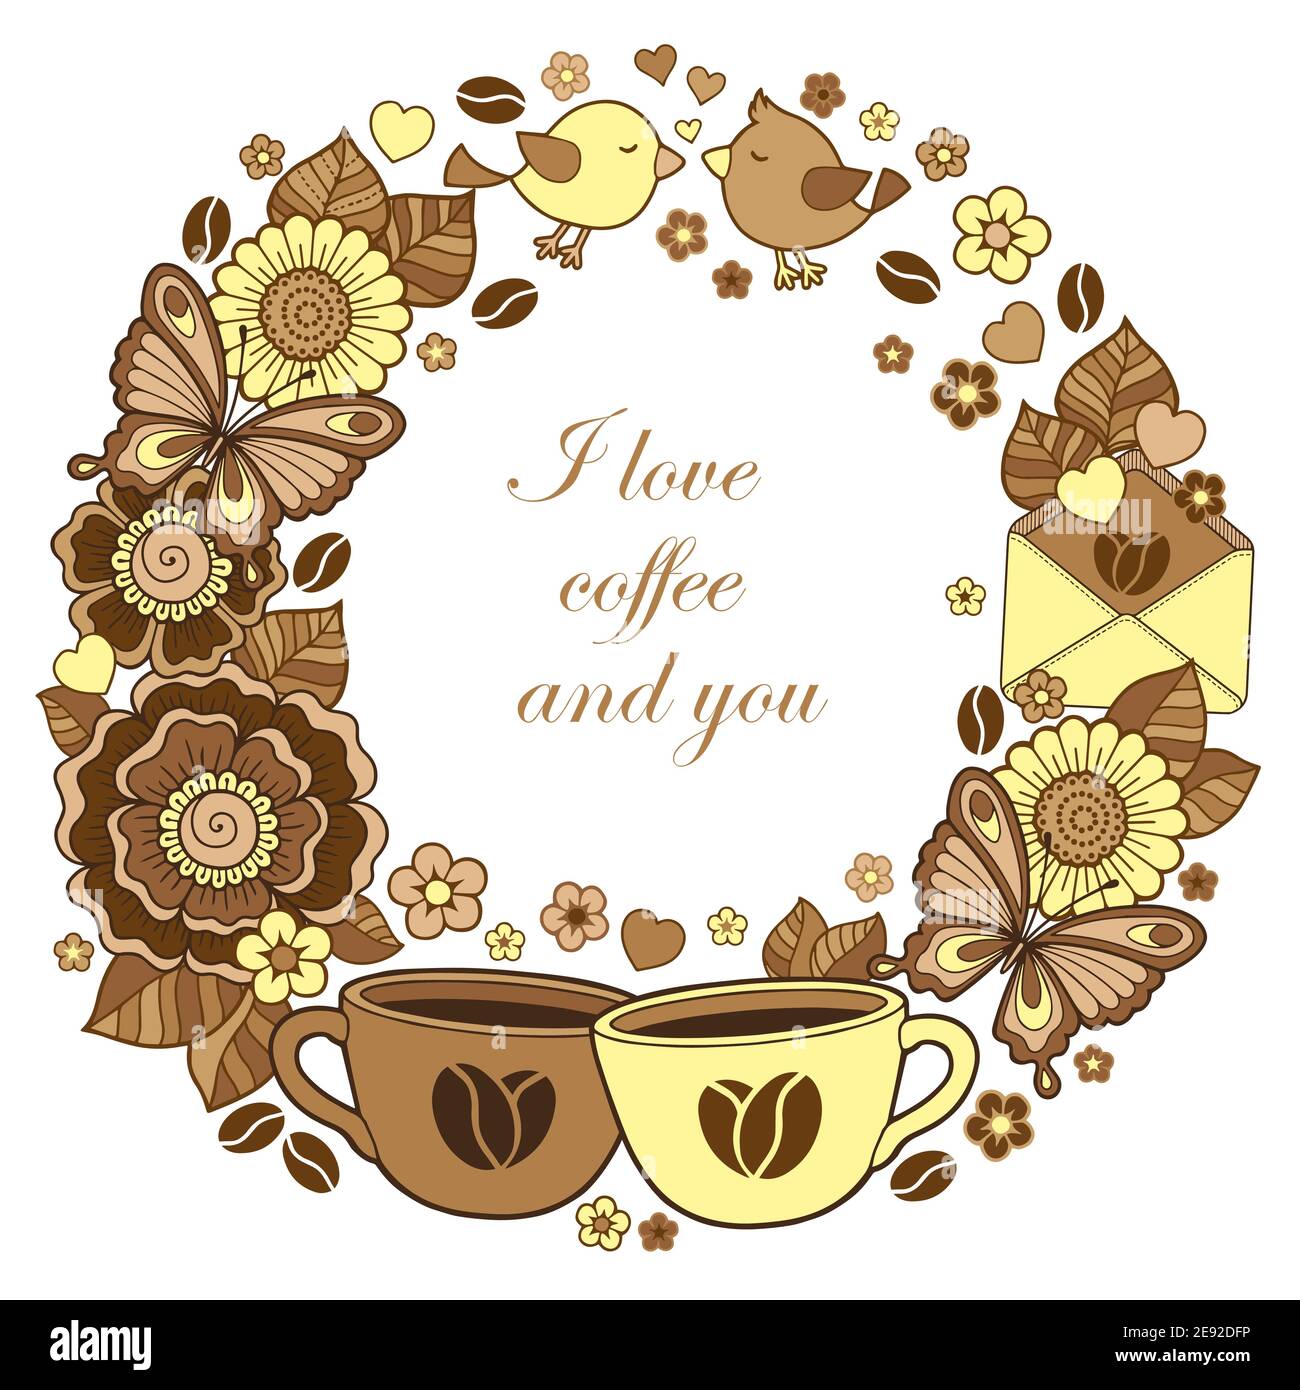 I love coffee and you. Round Abstract background made of flowers, cups, butterflies, and birds. Ornamental design for Valentine s Day cards and weddin Stock Vector